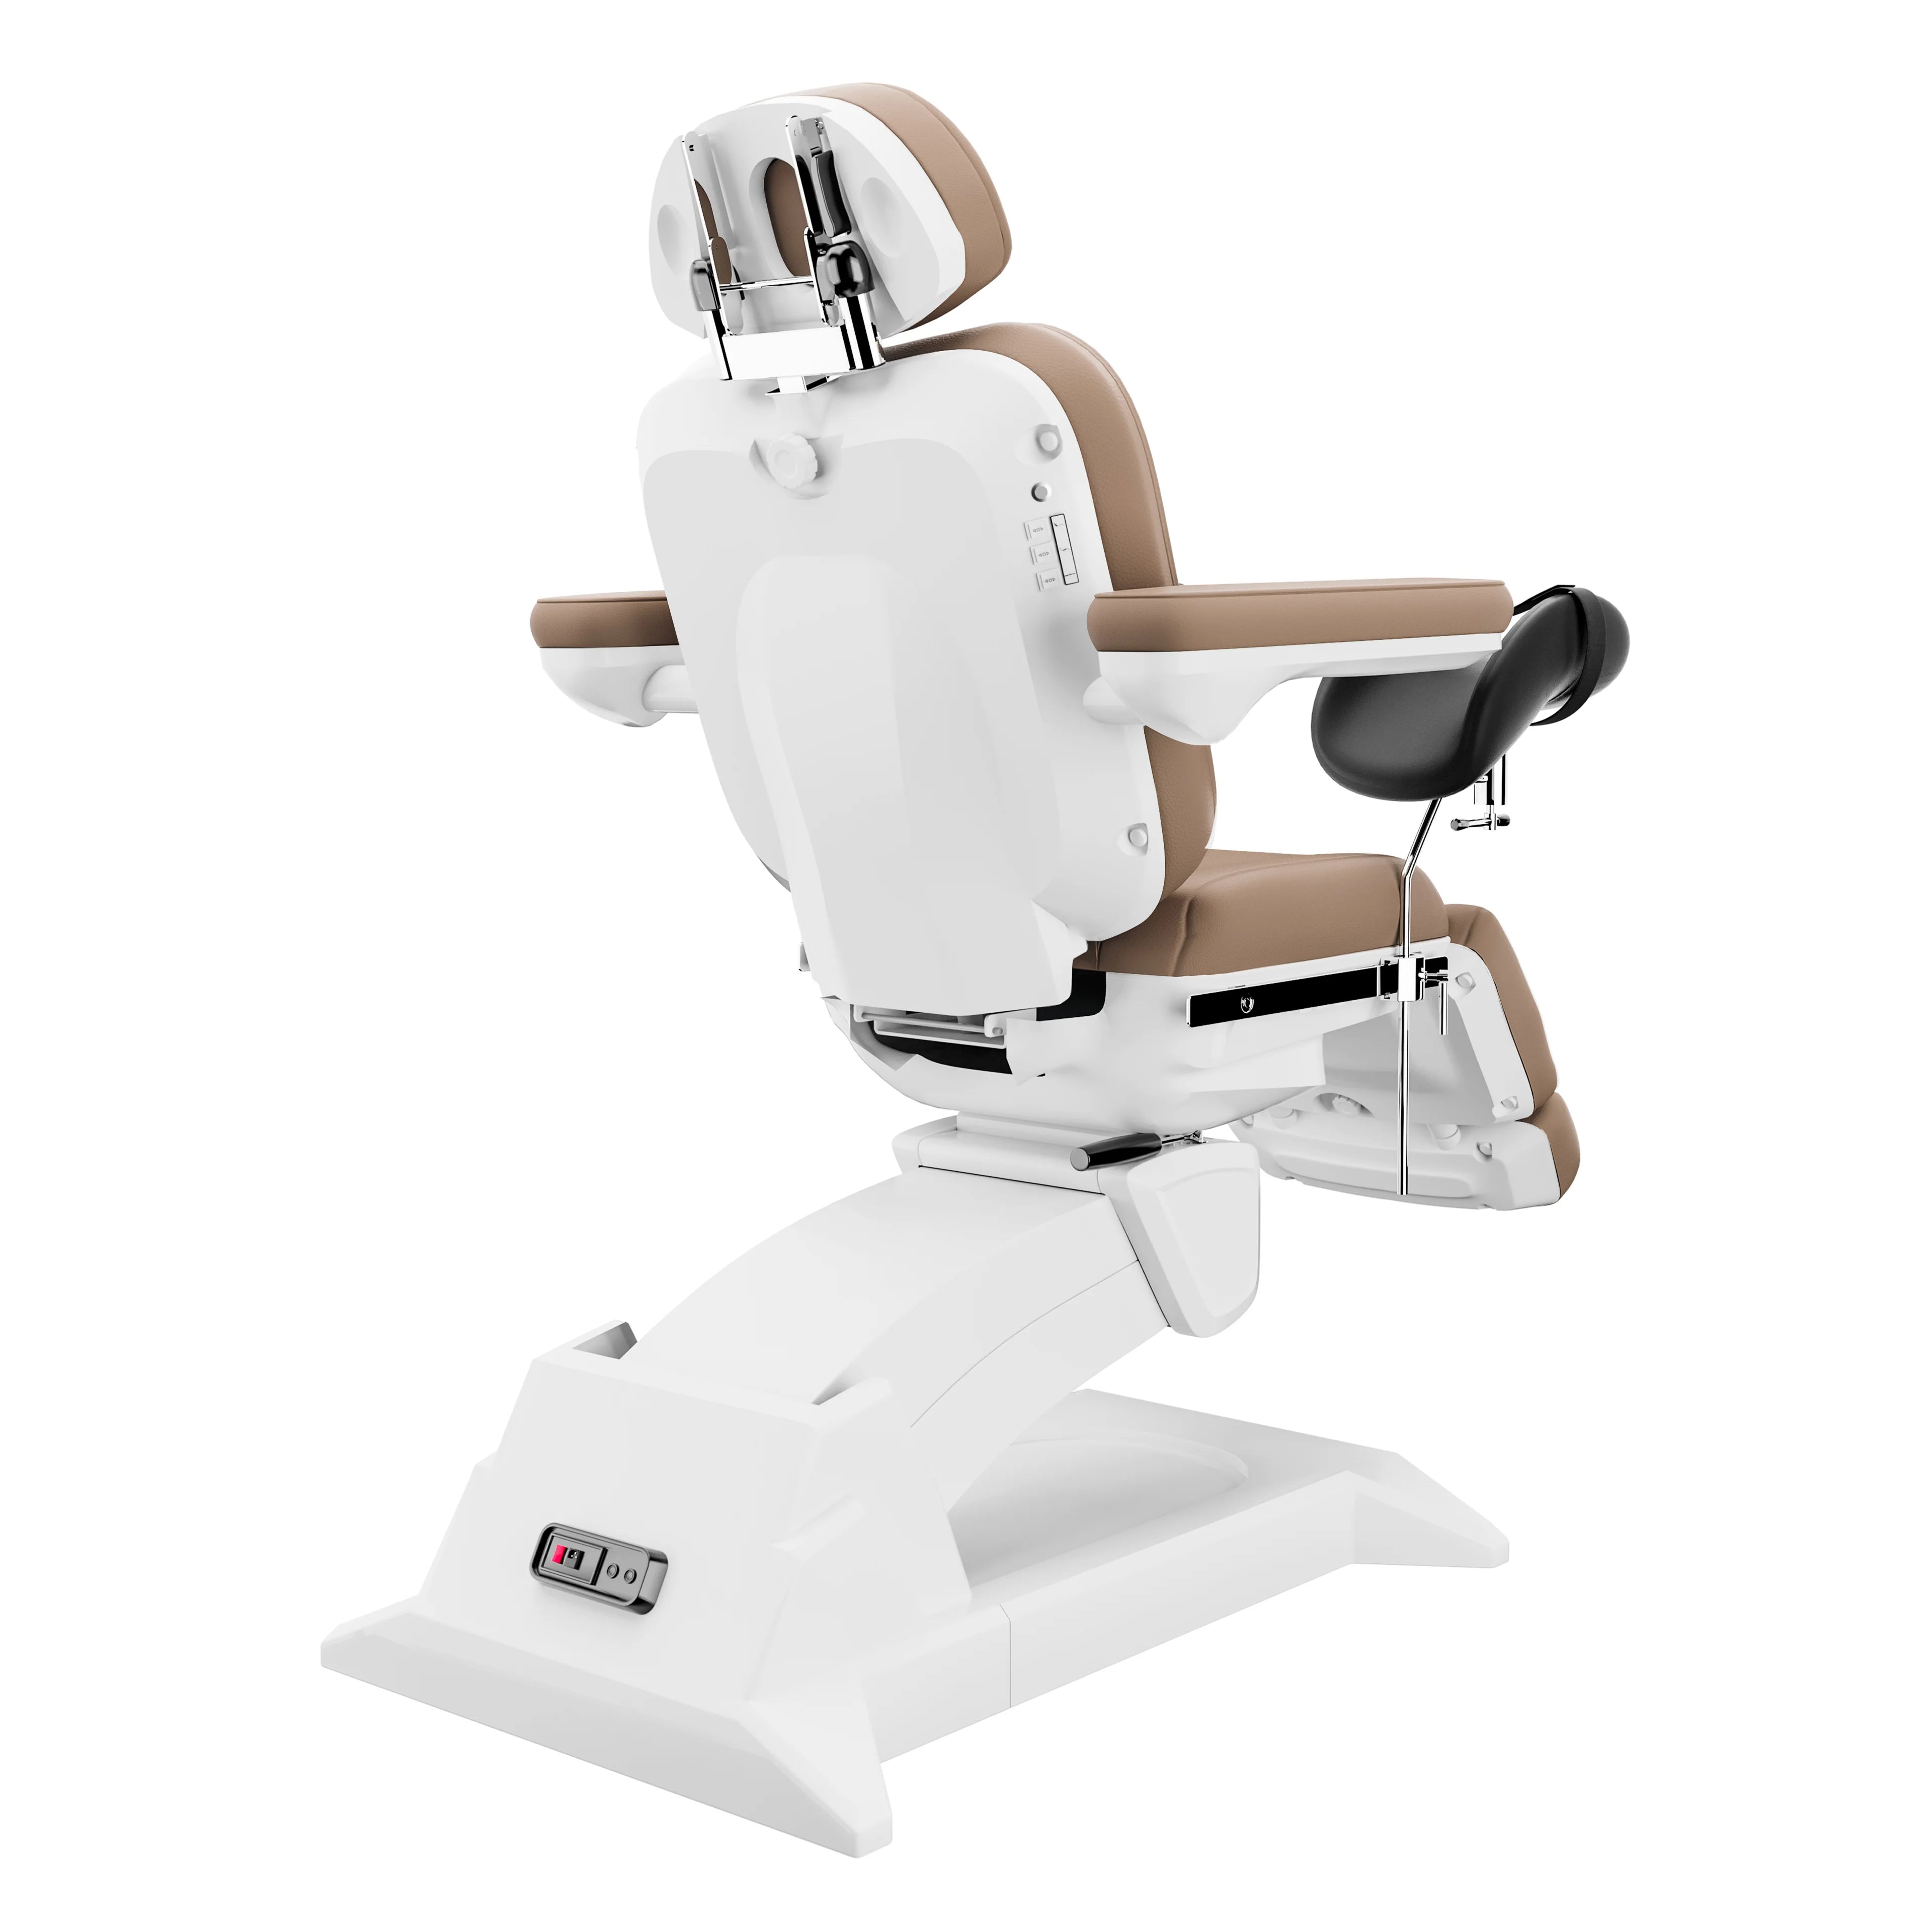 SpaMarc . Ultera (Brown) . OBGYN & Gynecology . Rotating . 4 Motor Spa Treatment Chair/Bed